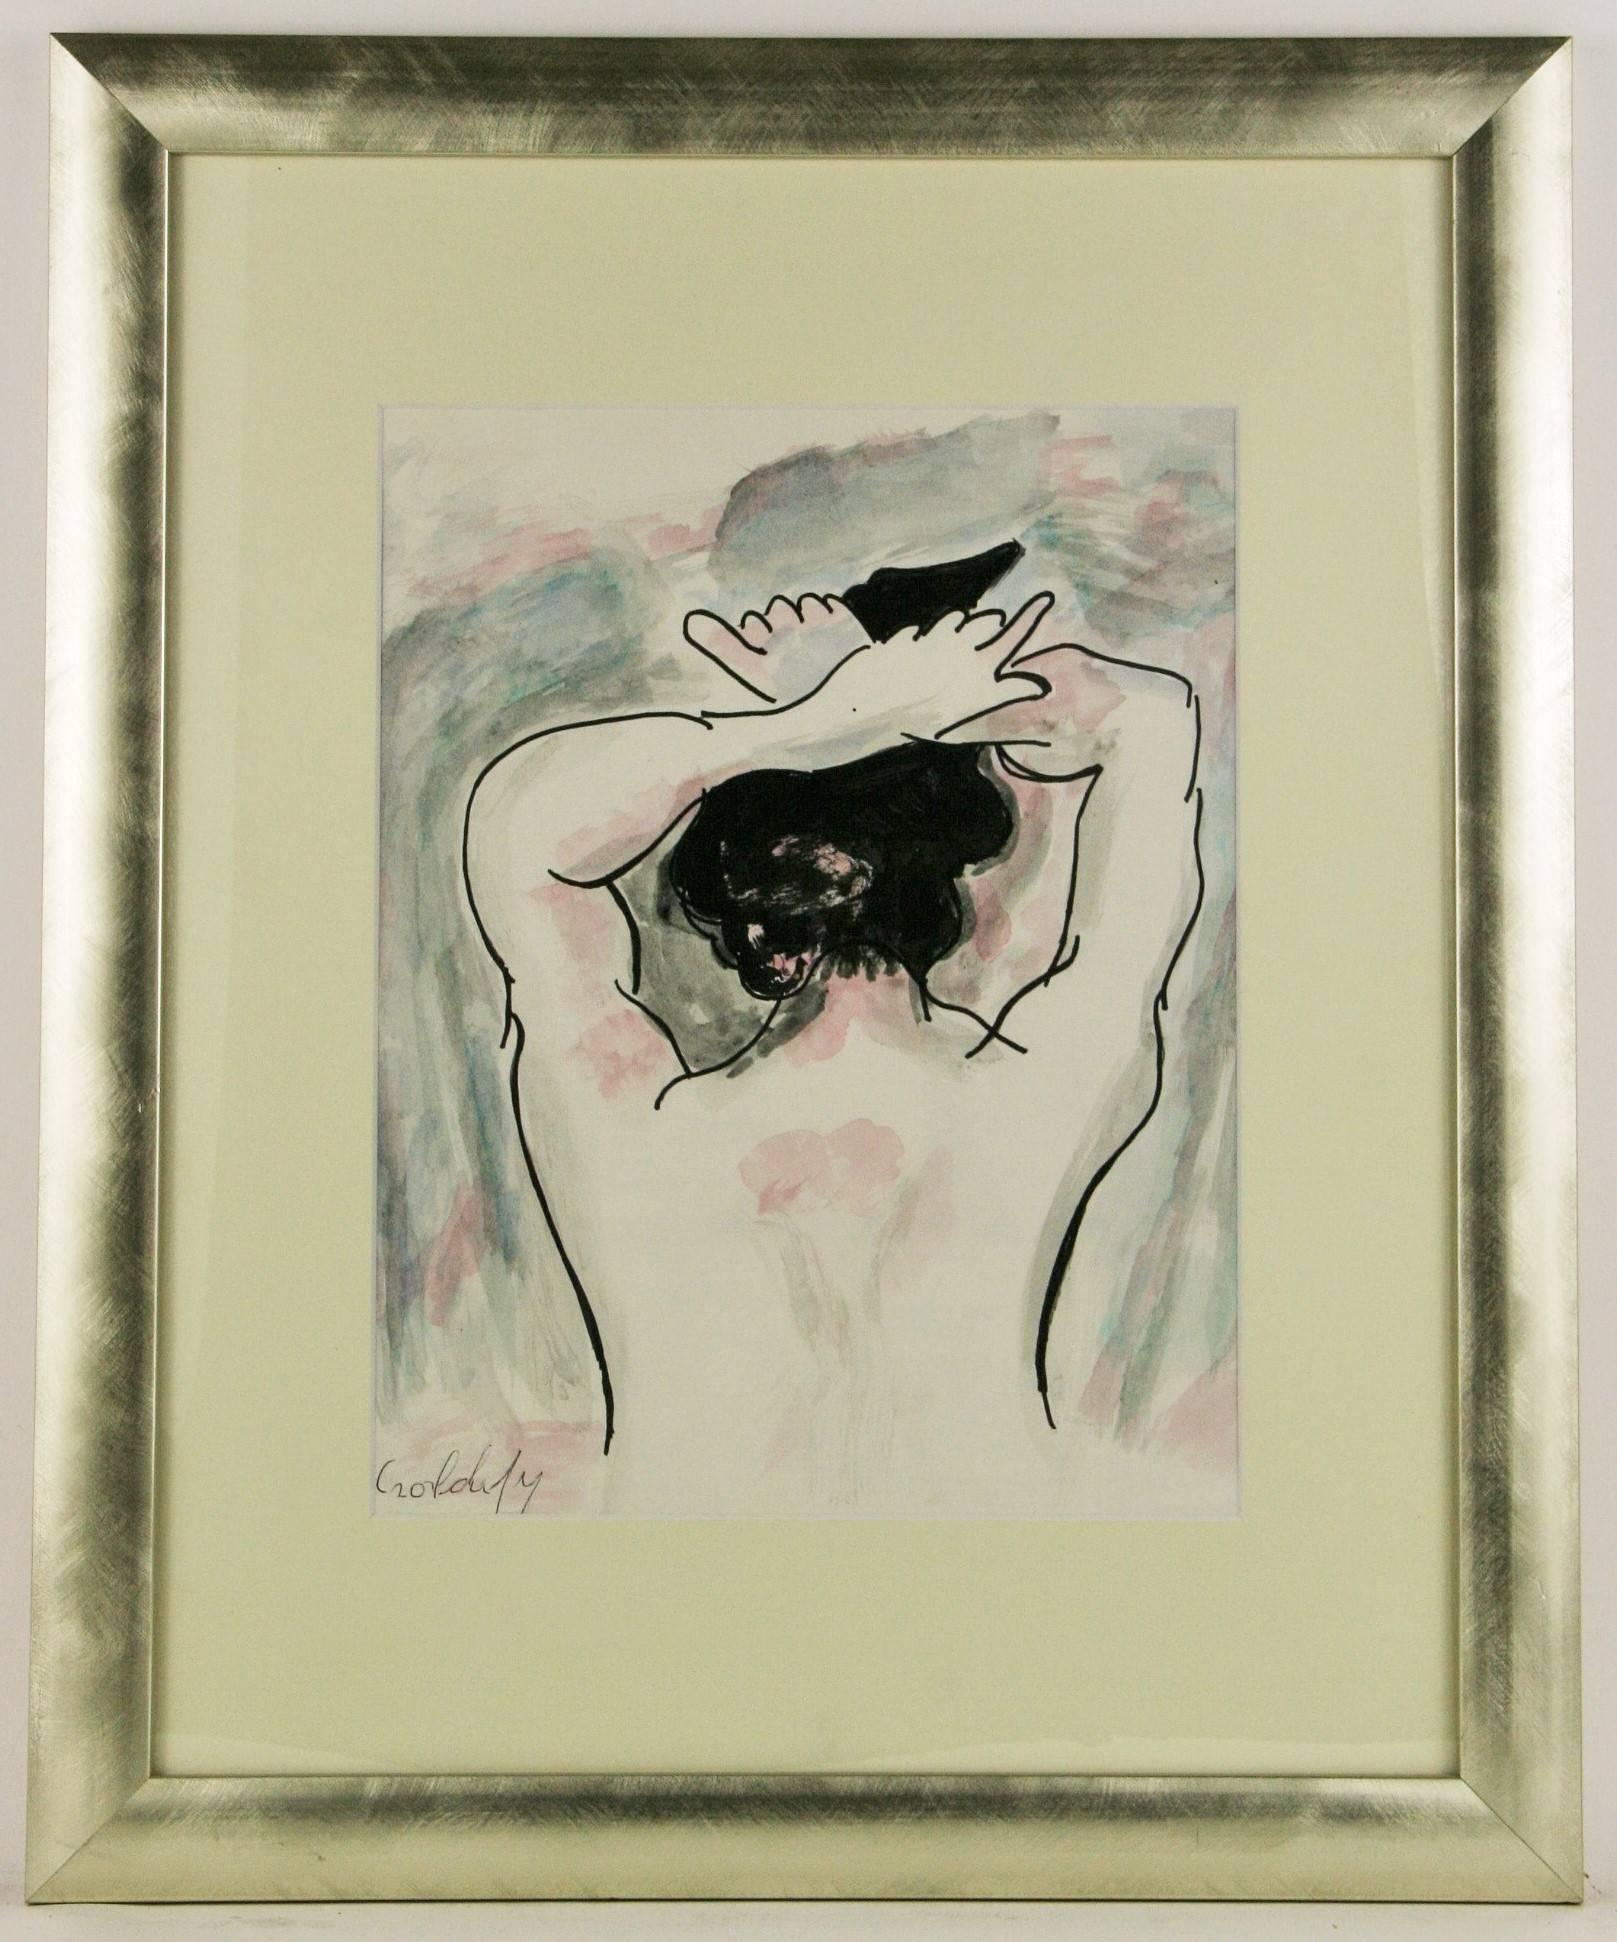 #5-2816 A female  figure posing,gouache on paper displayed in a silver-finish wood frame,mat and under glass.Illegible signature lower left.
Image size 13.5 H x 10.5 W